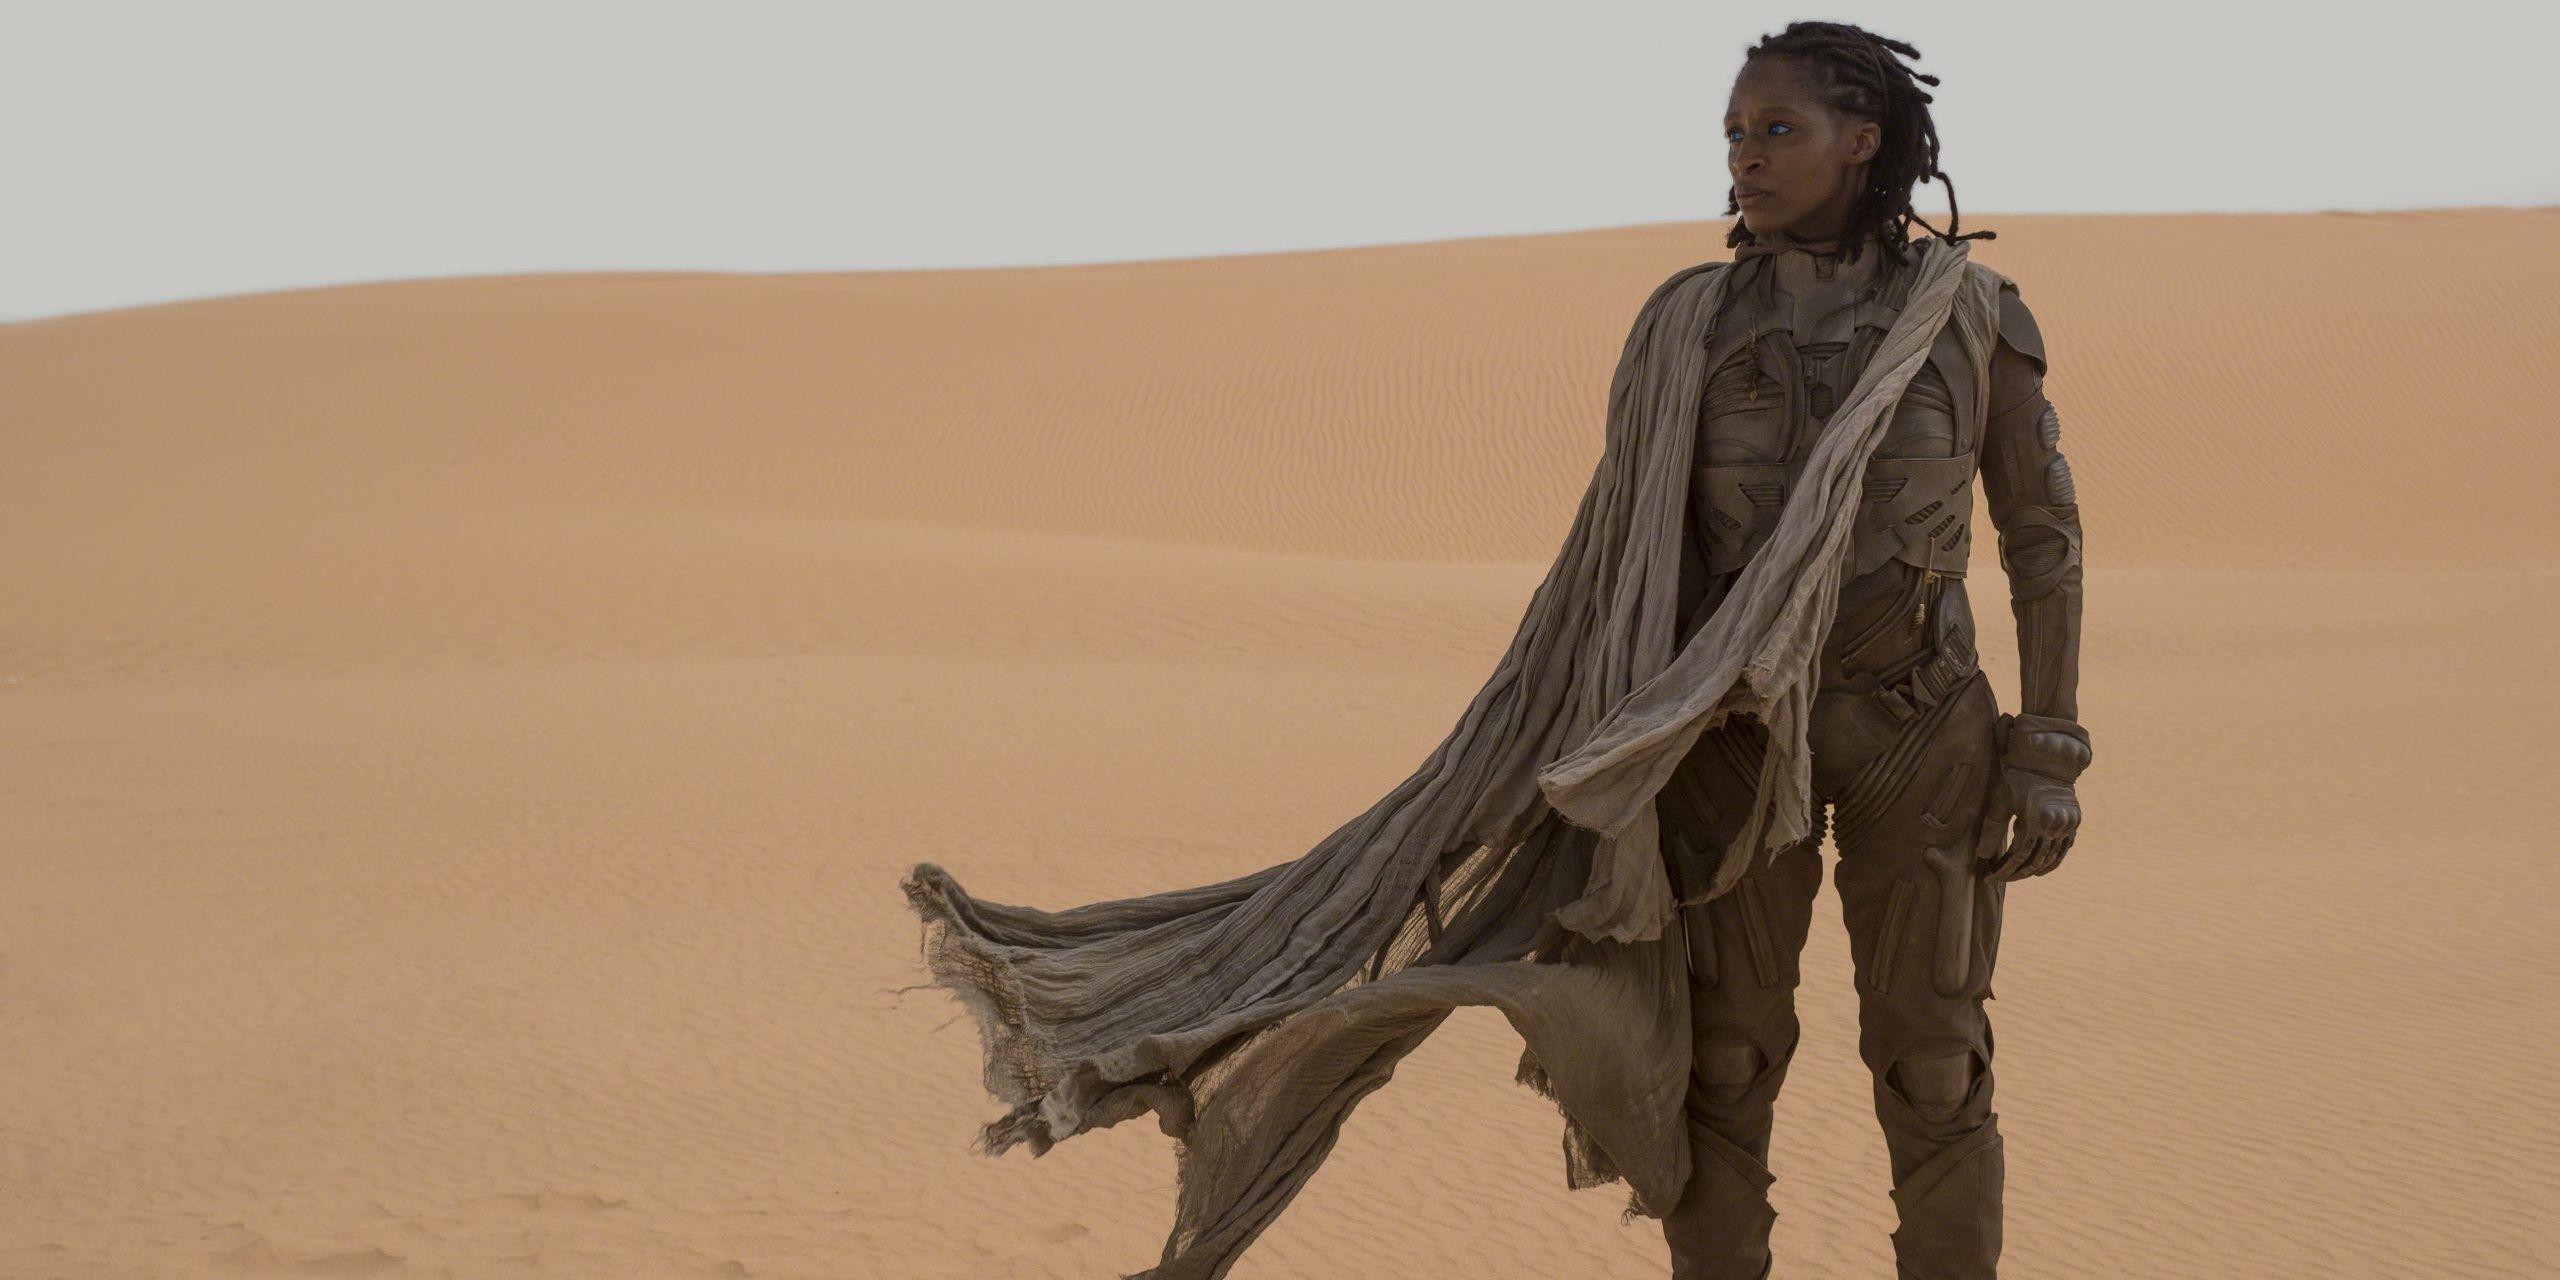 Liet standing in the middle of the desert in Dune (2021).